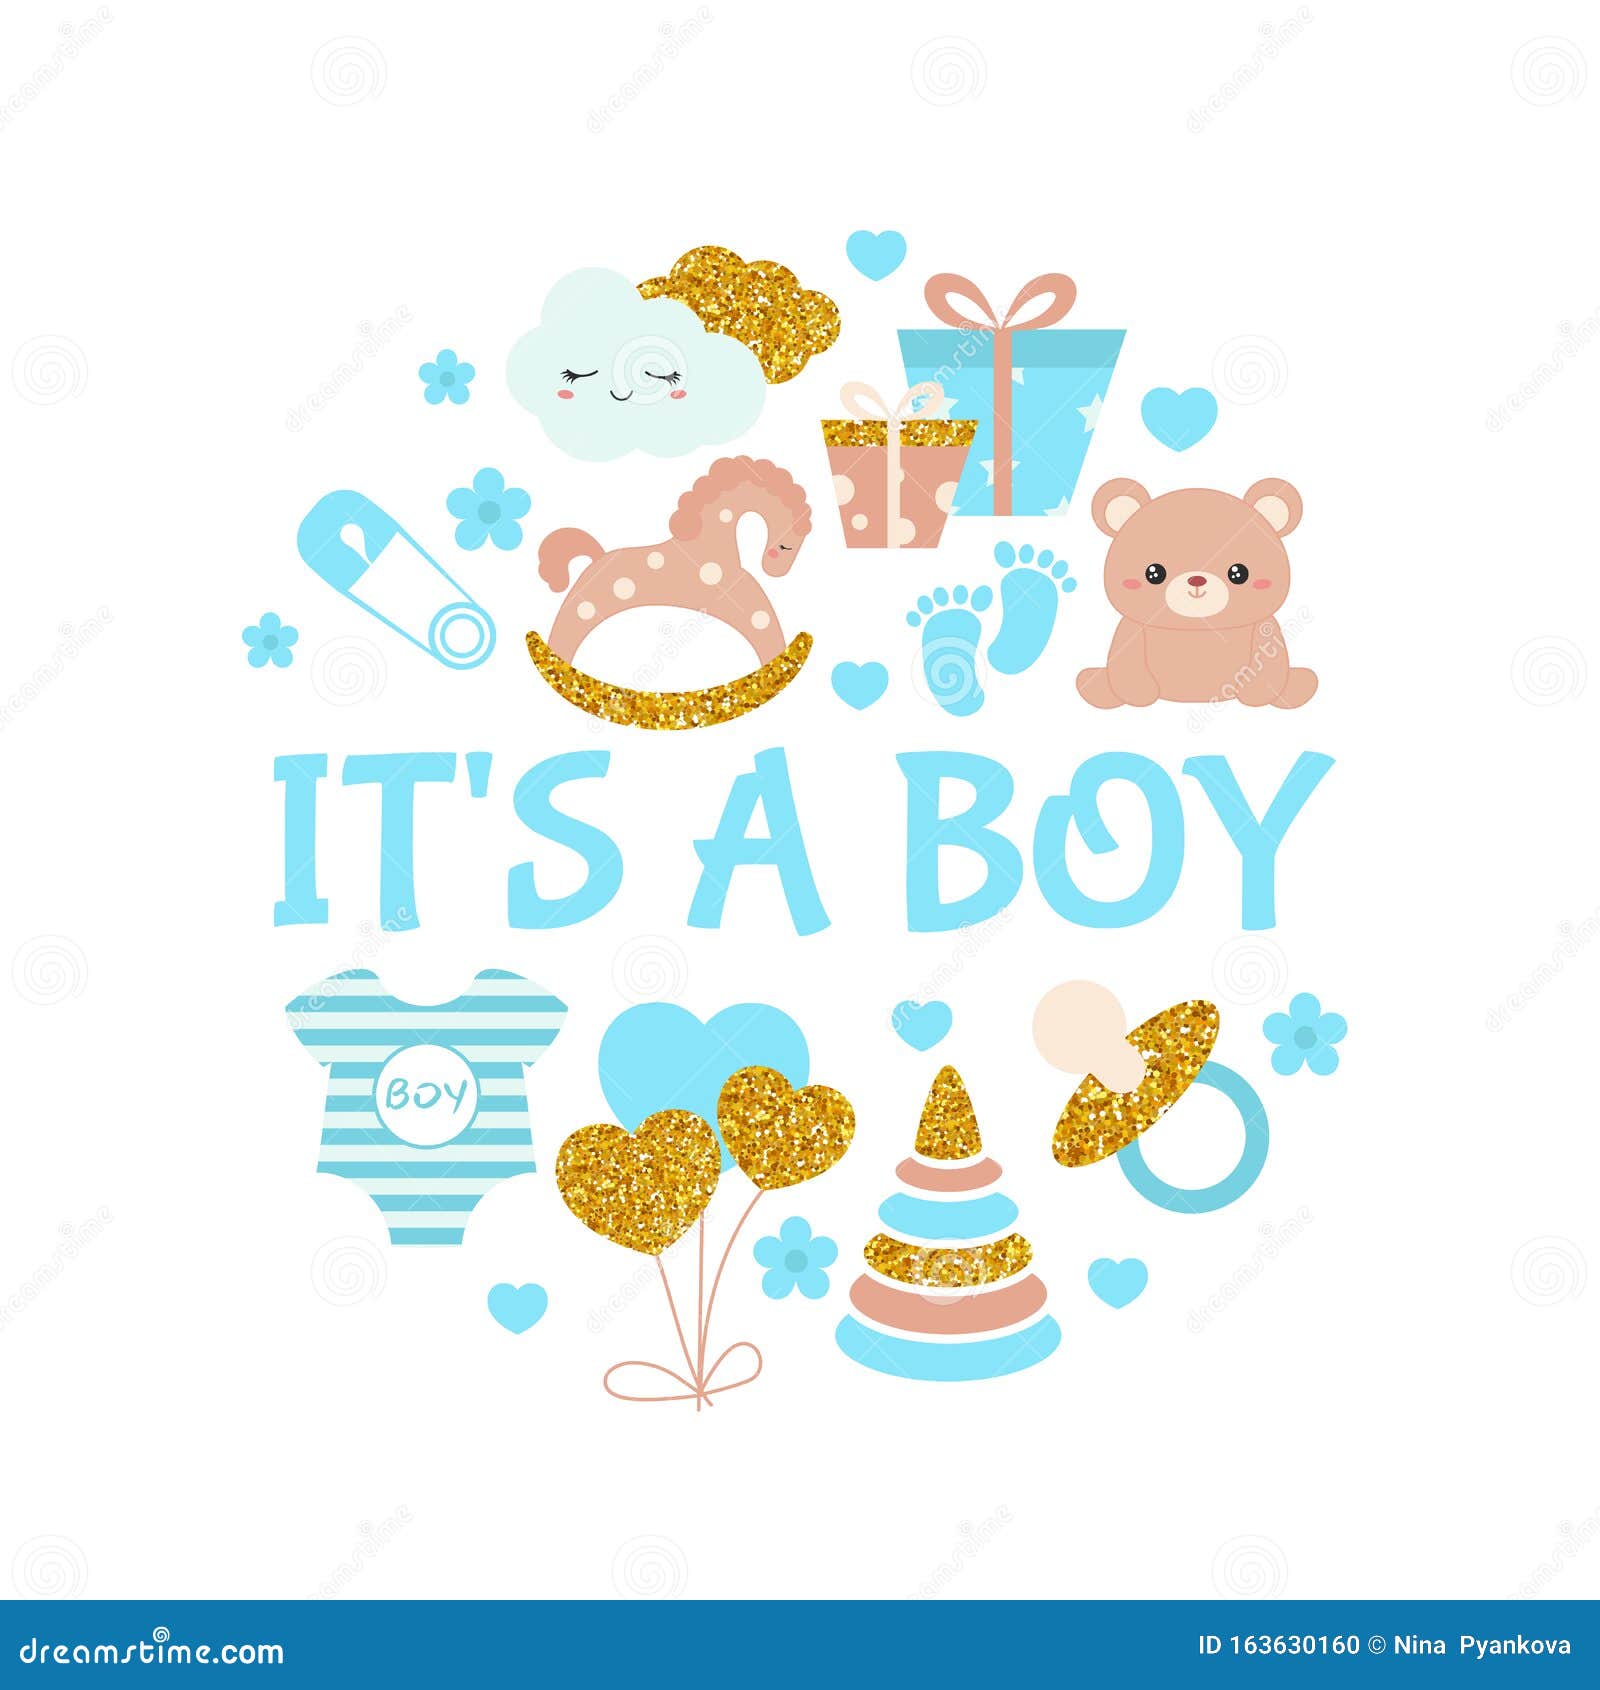 Baby Shower Gift Certificate Template from thumbs.dreamstime.com